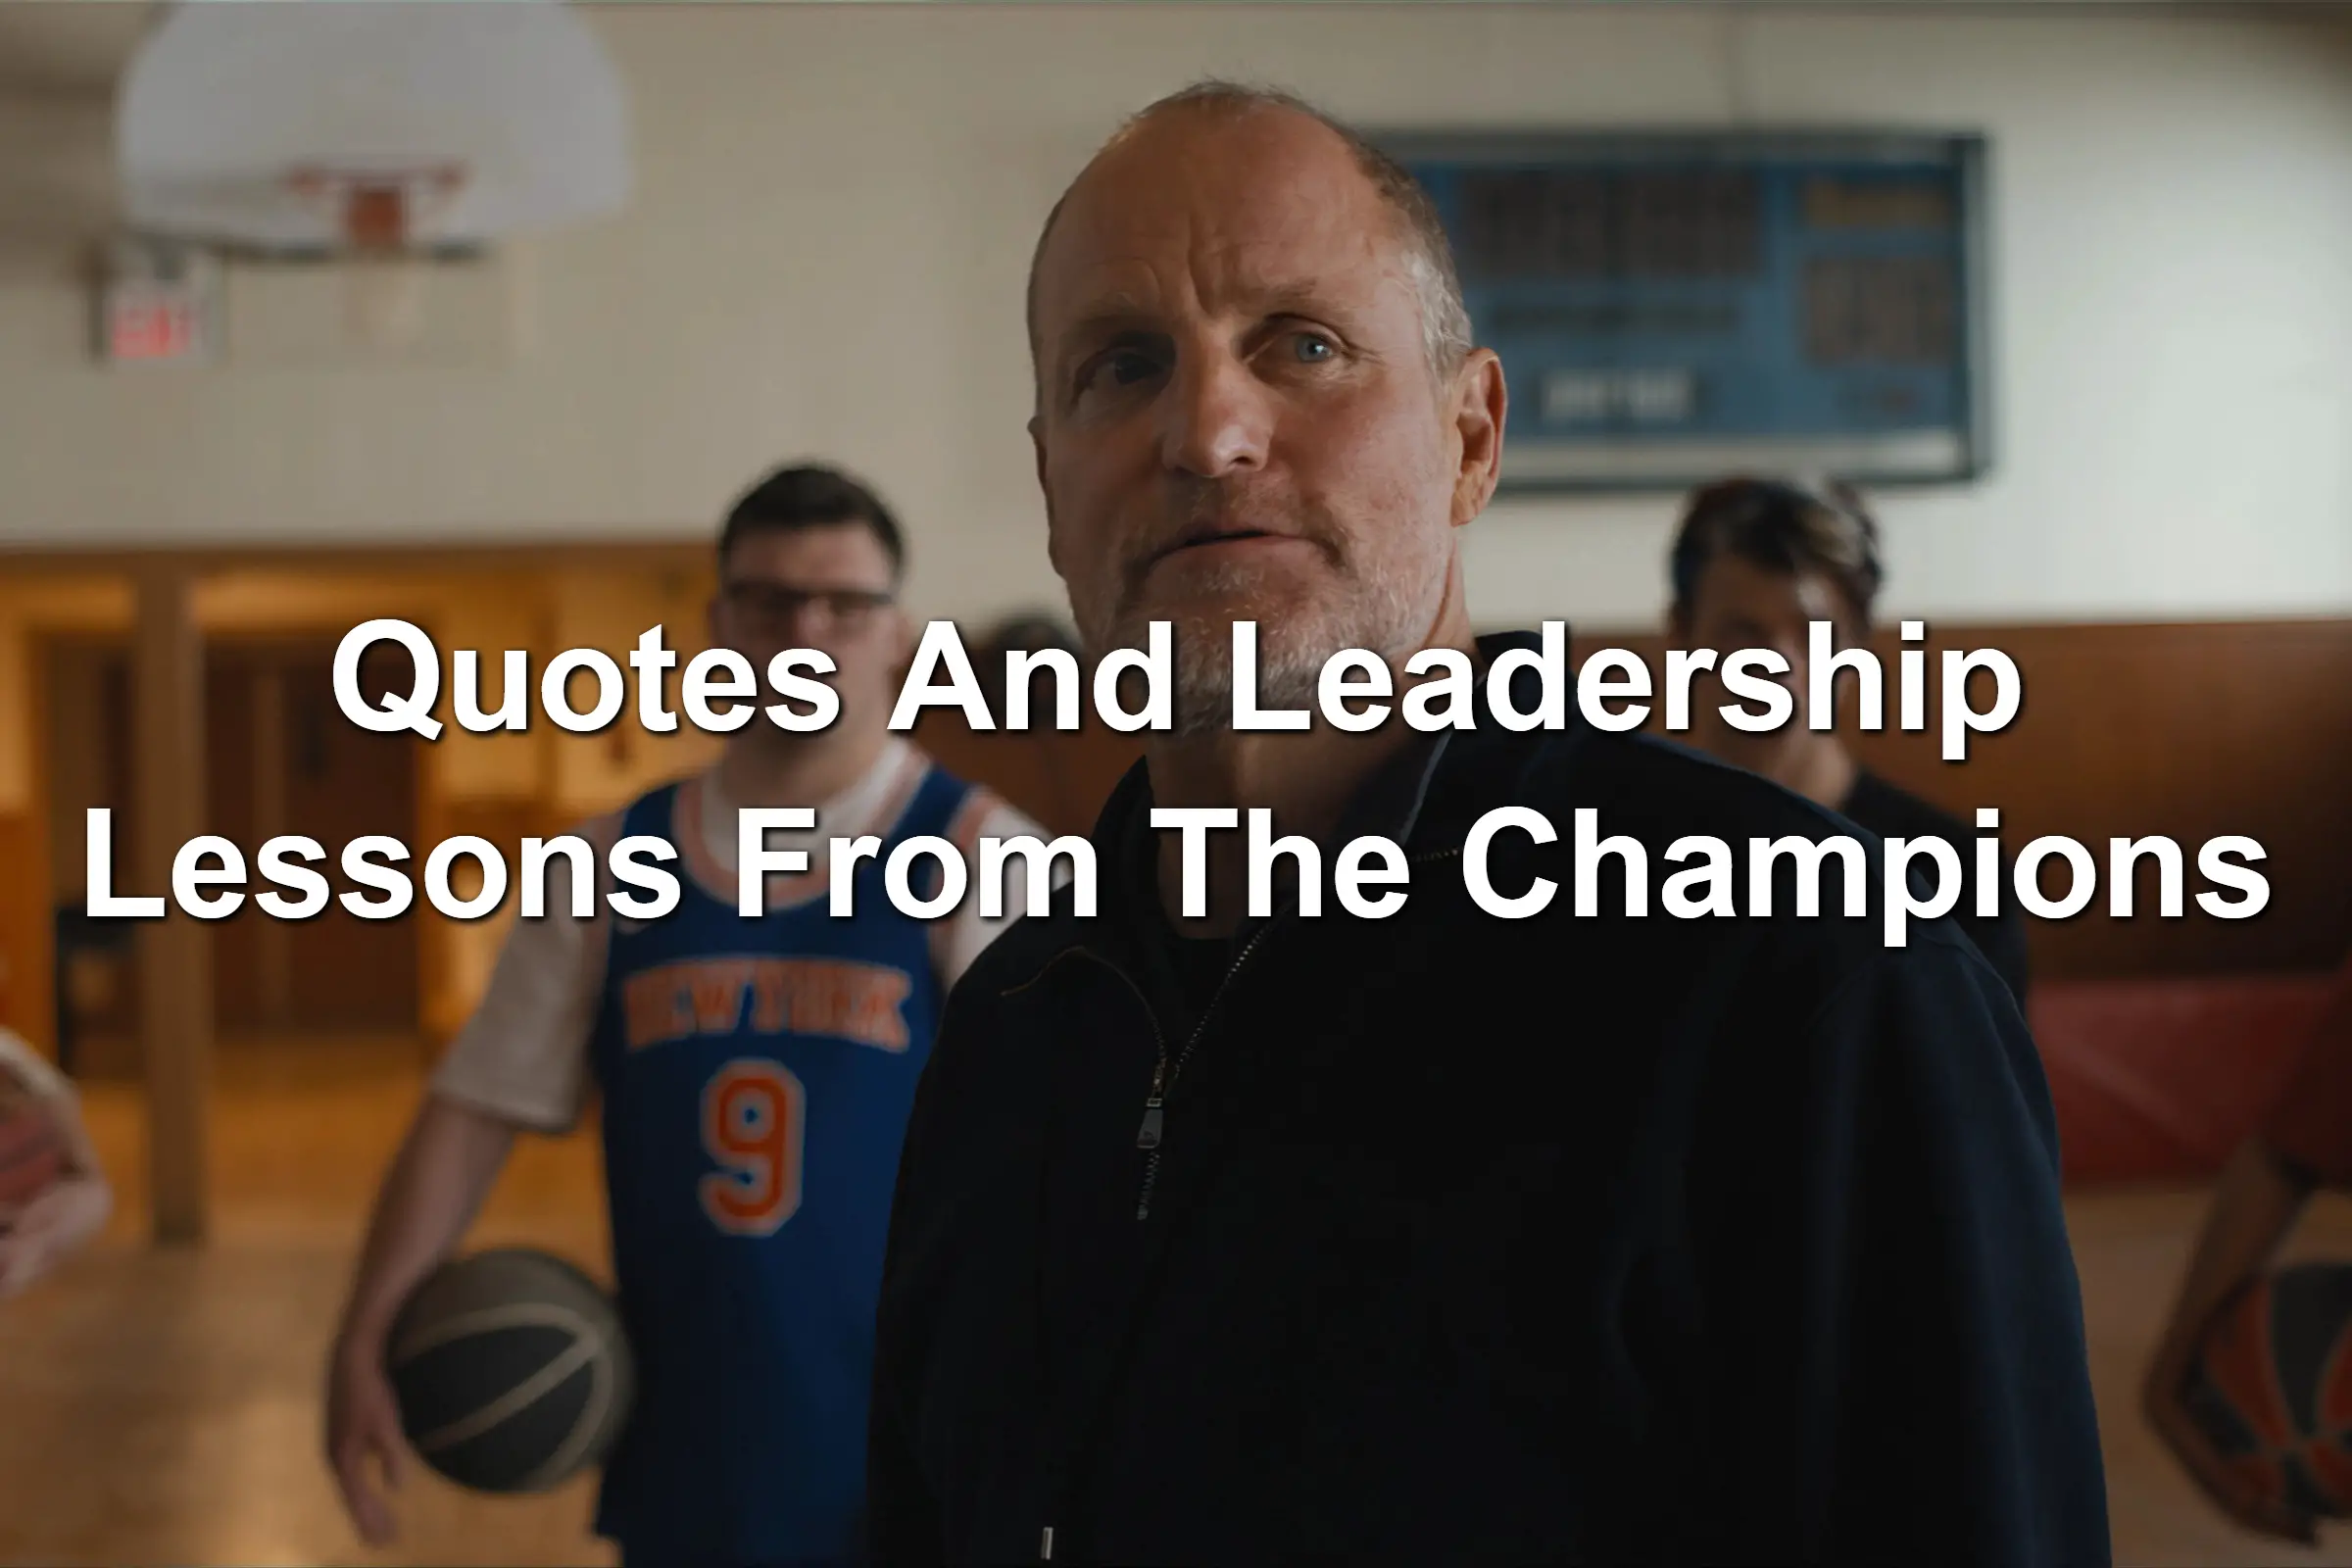 Woody Harrelson in the movie The Champions